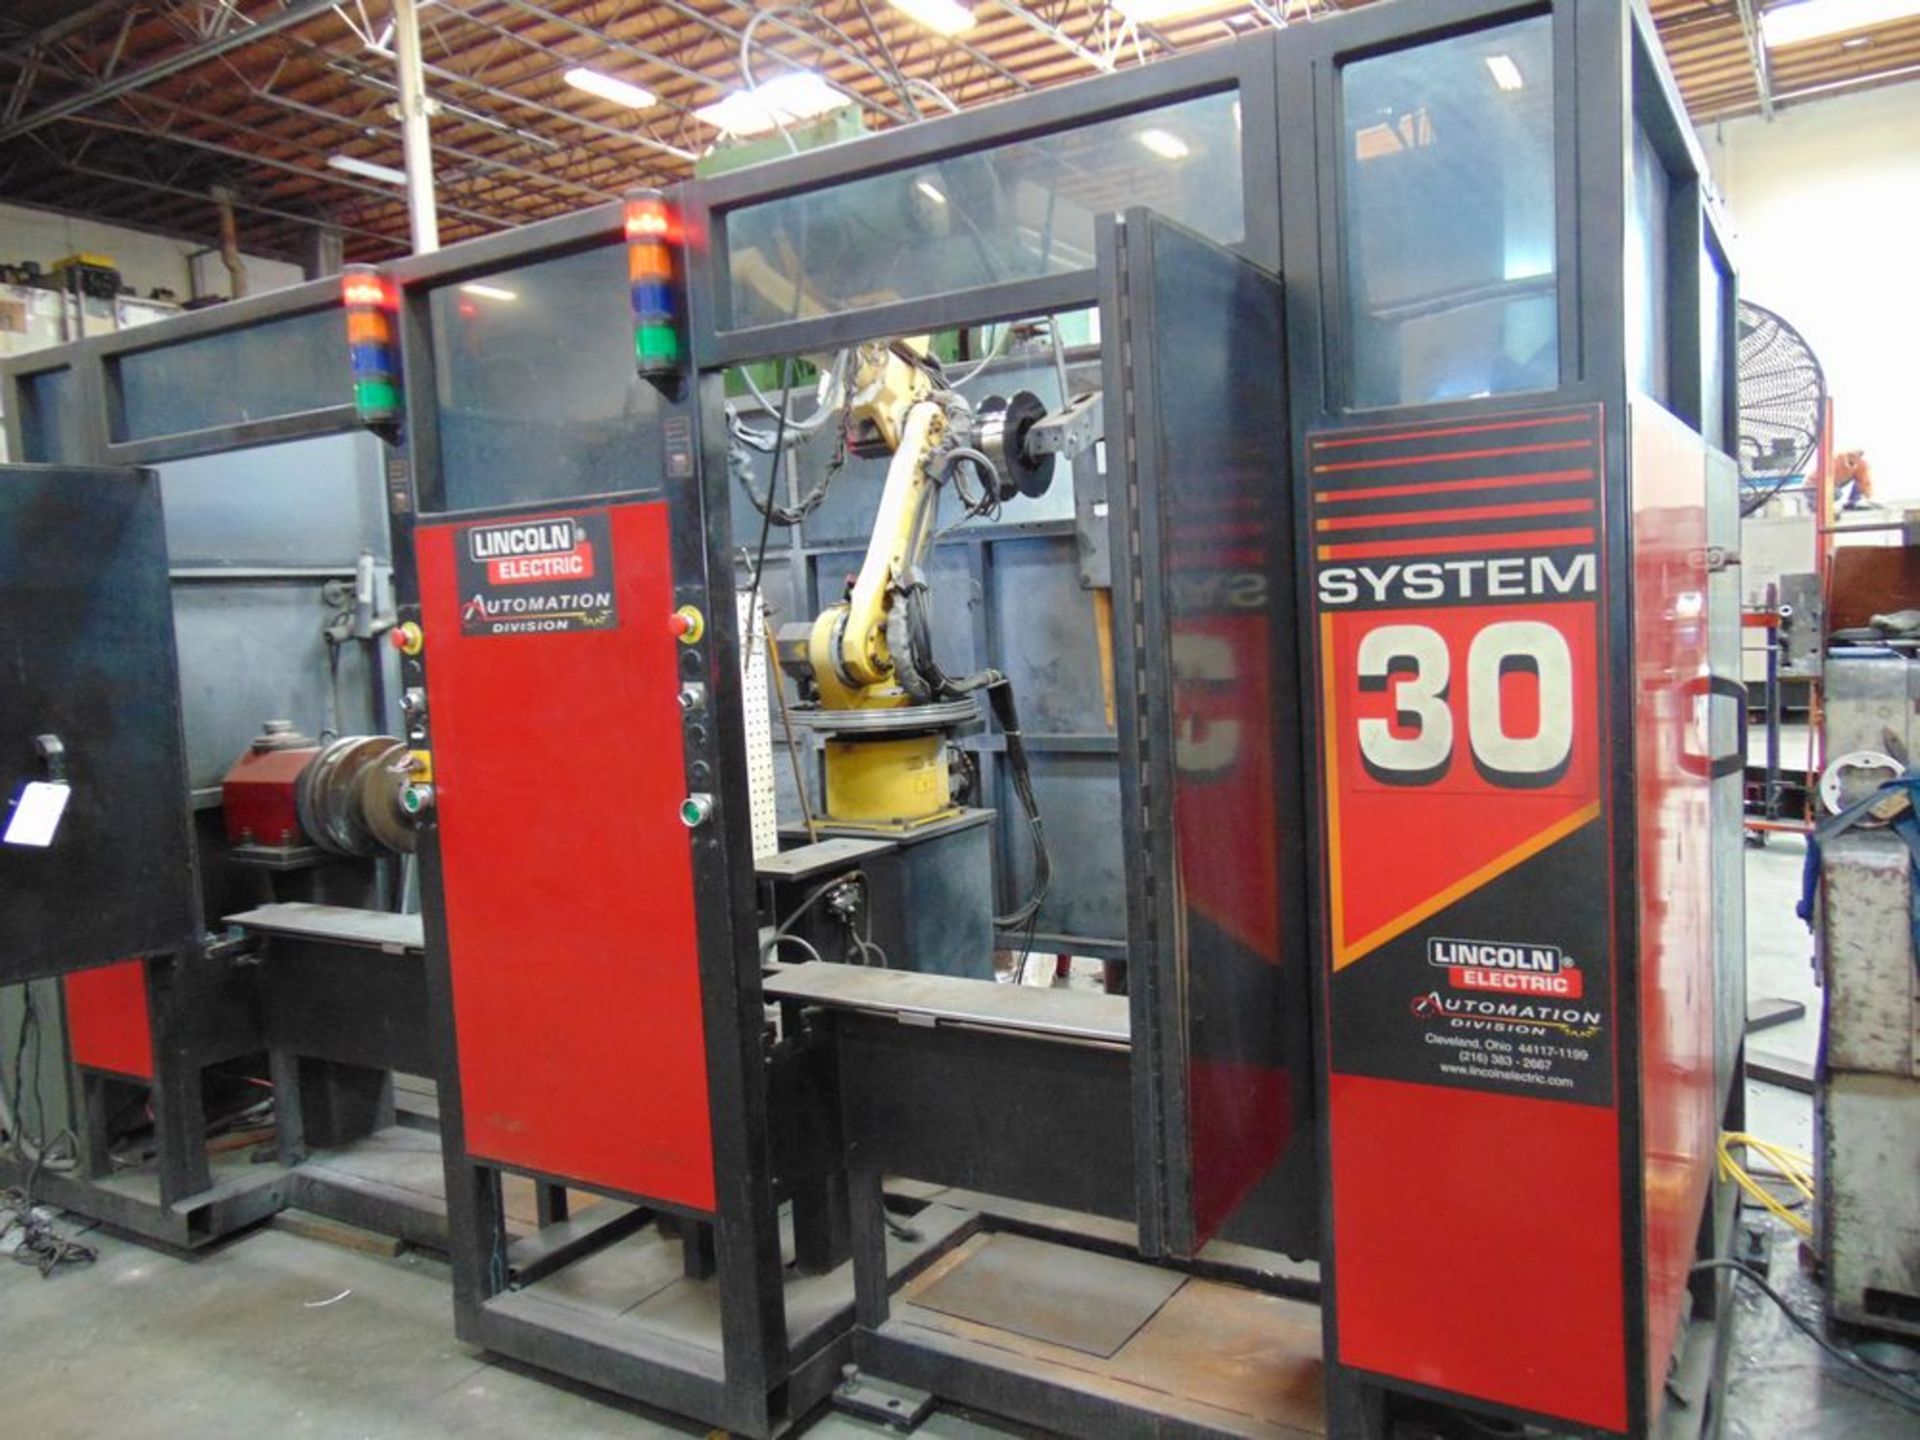 Lincoln System 30, 6-Axis Robotic Welder w/ Dual Spinning Chucks, Fanuc ARC Mate 100iB Robot & - Image 2 of 6